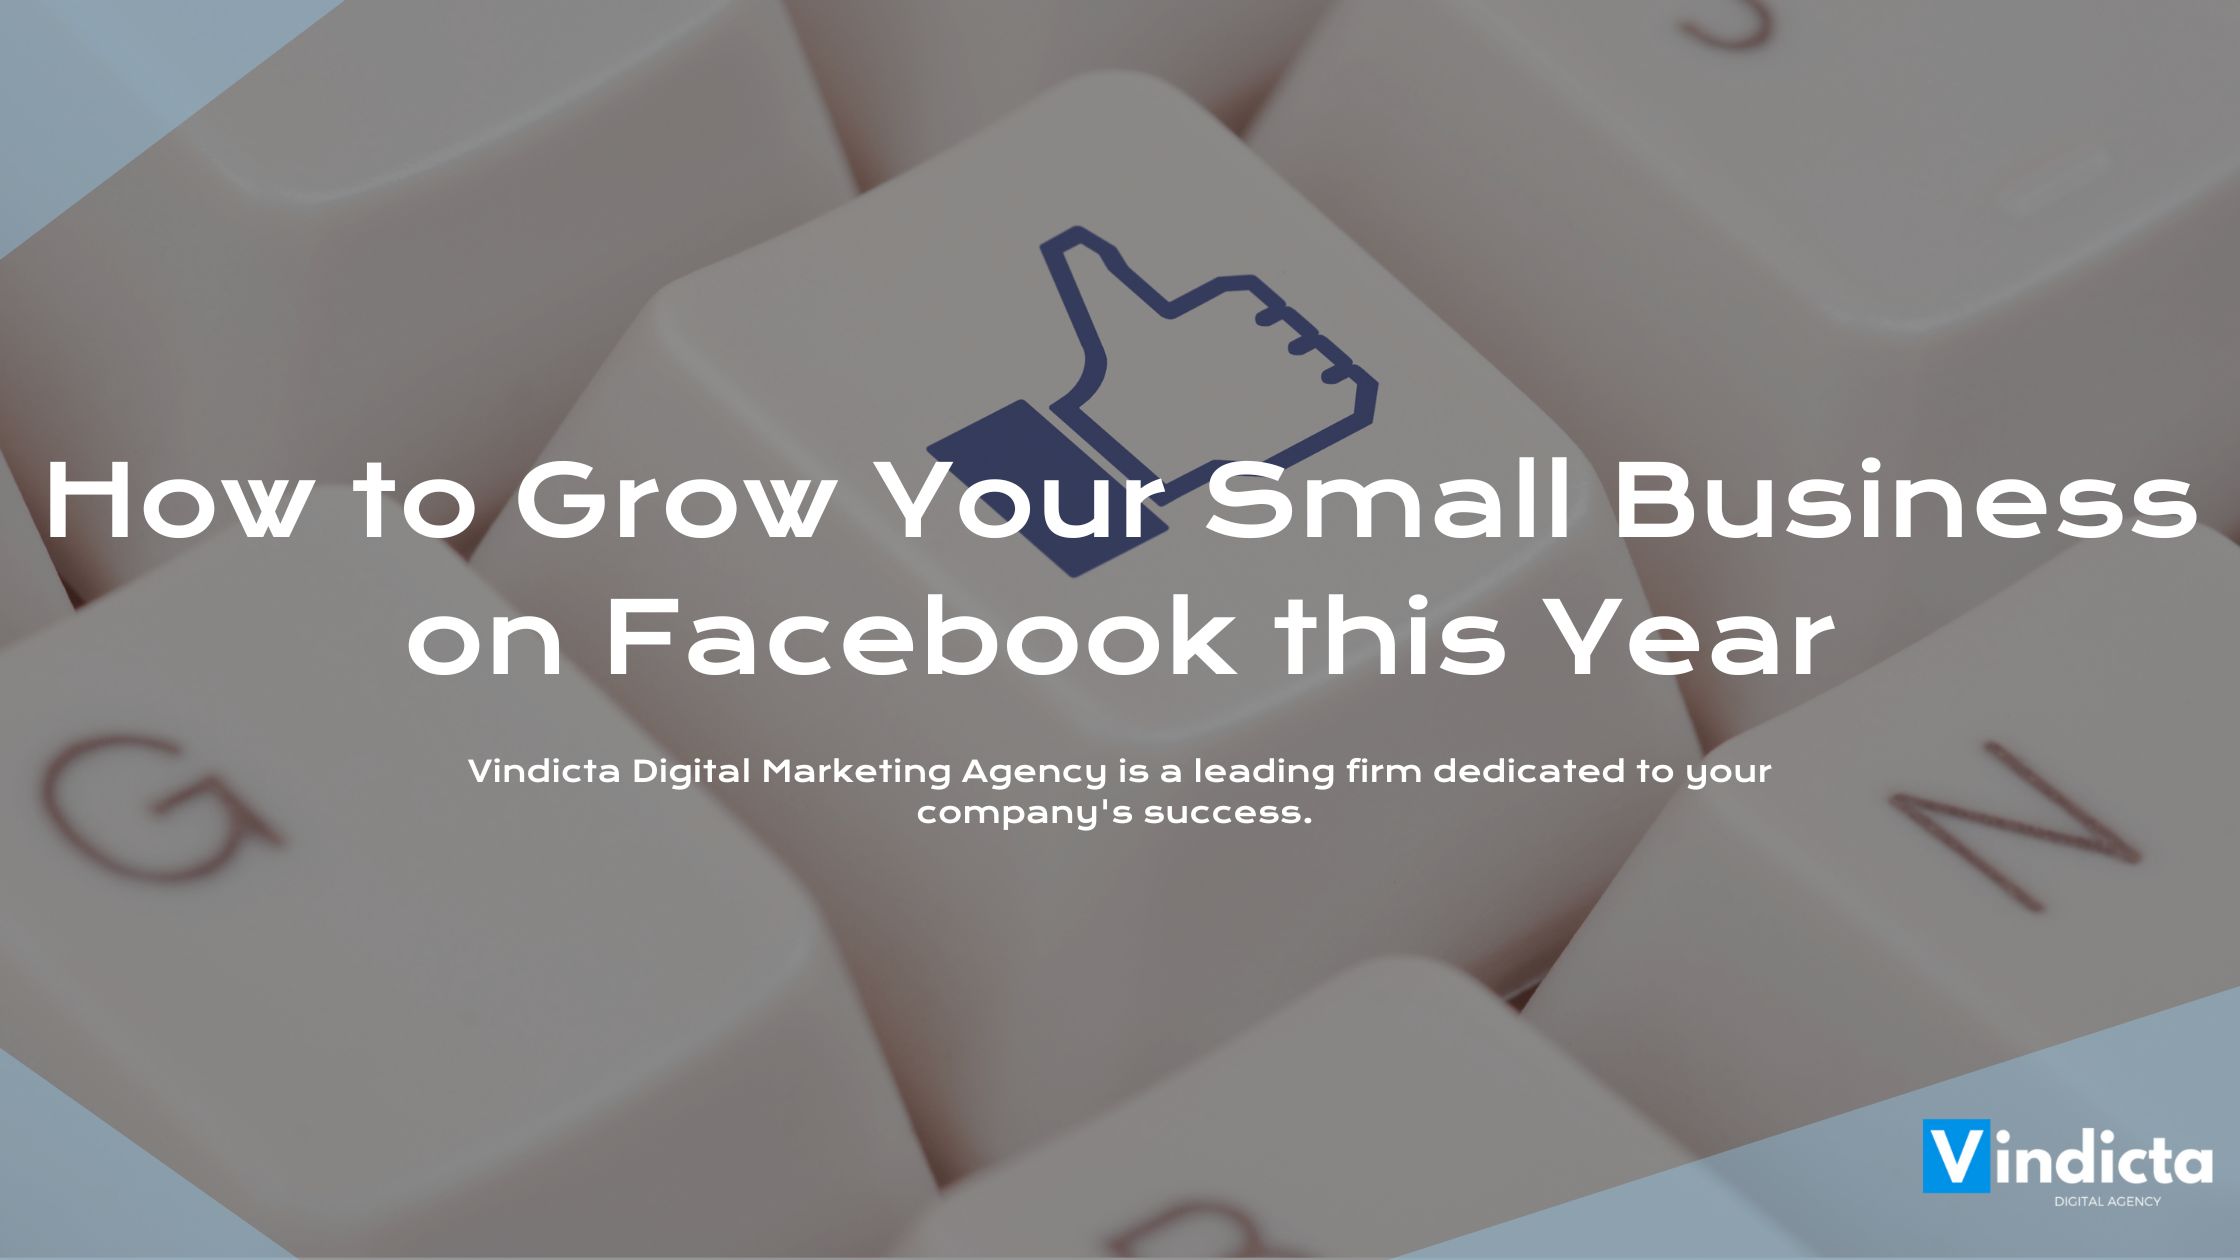 How to Grow Your Small Business on Facebook this Year